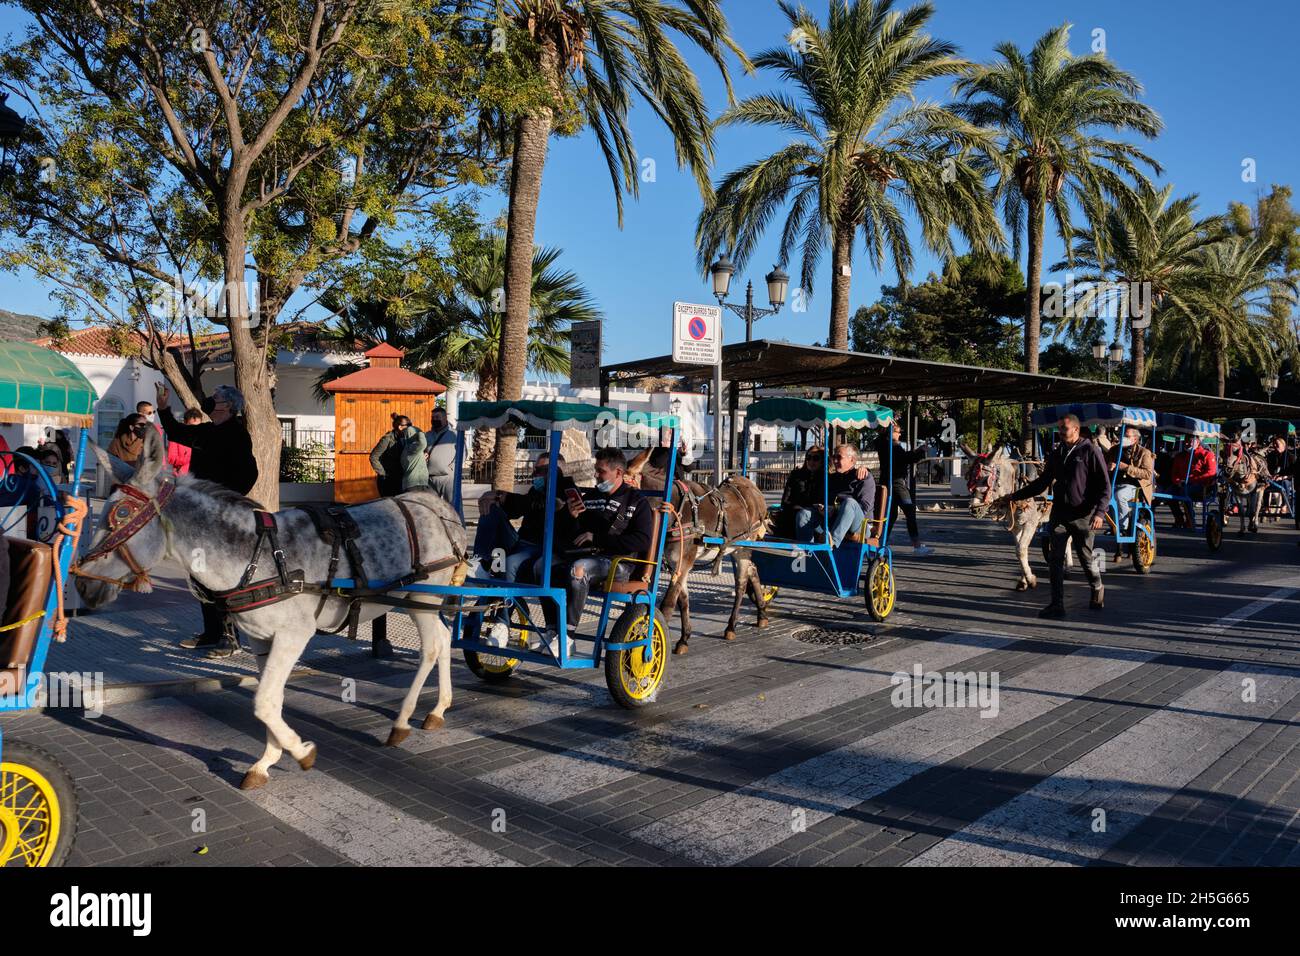 Donkeys - Burro Taxi with carriages, Mijas Pueblo, Malaga province, Andalusia, Spain. Stock Photo